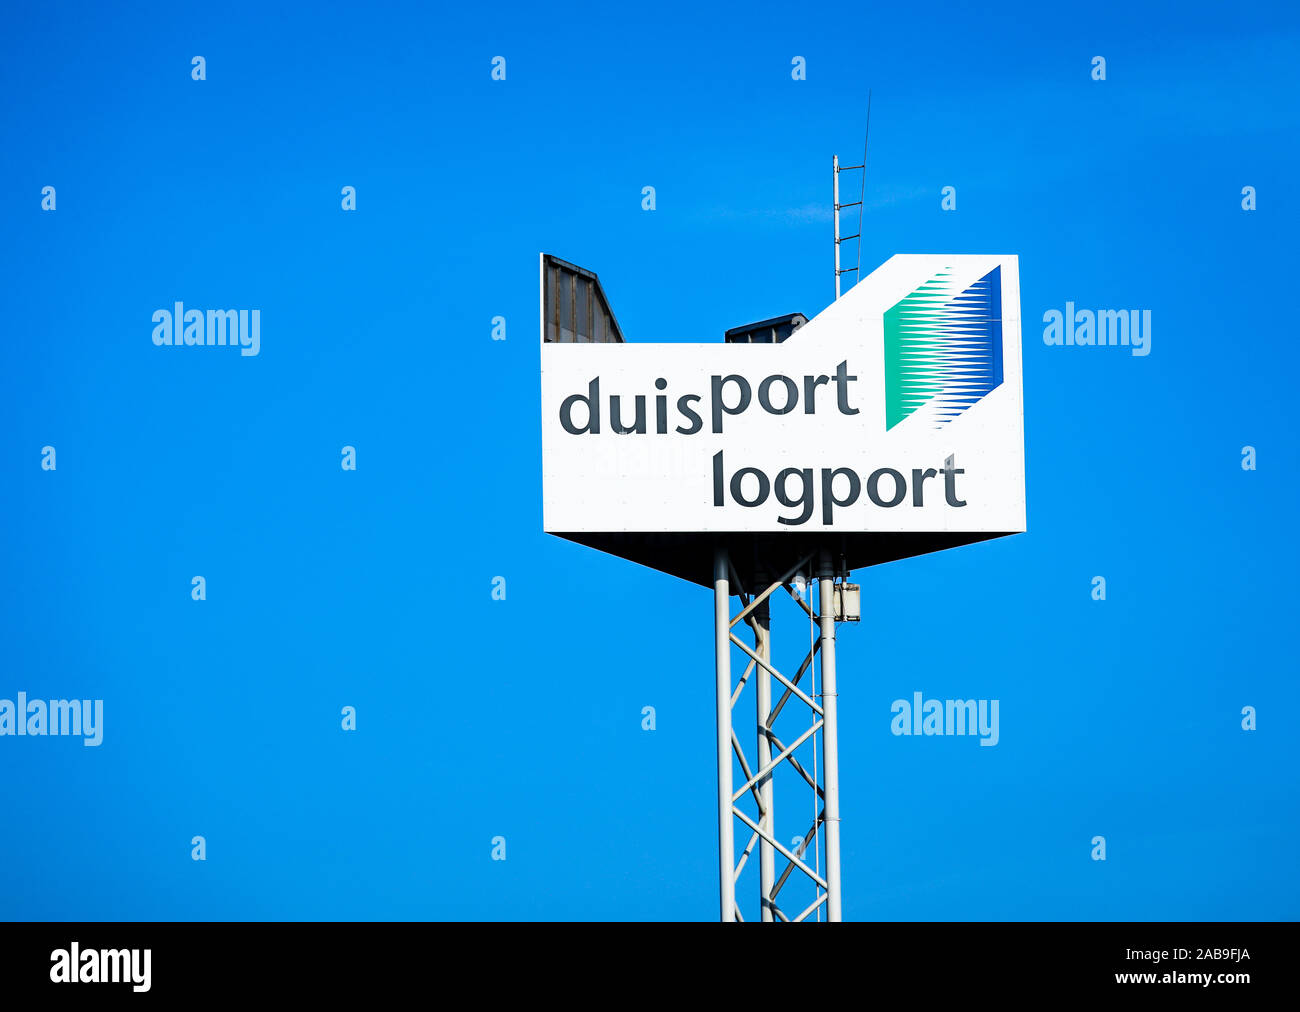 Duisburg, Ruhr area, North Rhine-Westphalia, Germany - Duisburger Hafen, Containerhafen, duisport logport, two of the world's largest container shippi Stock Photo